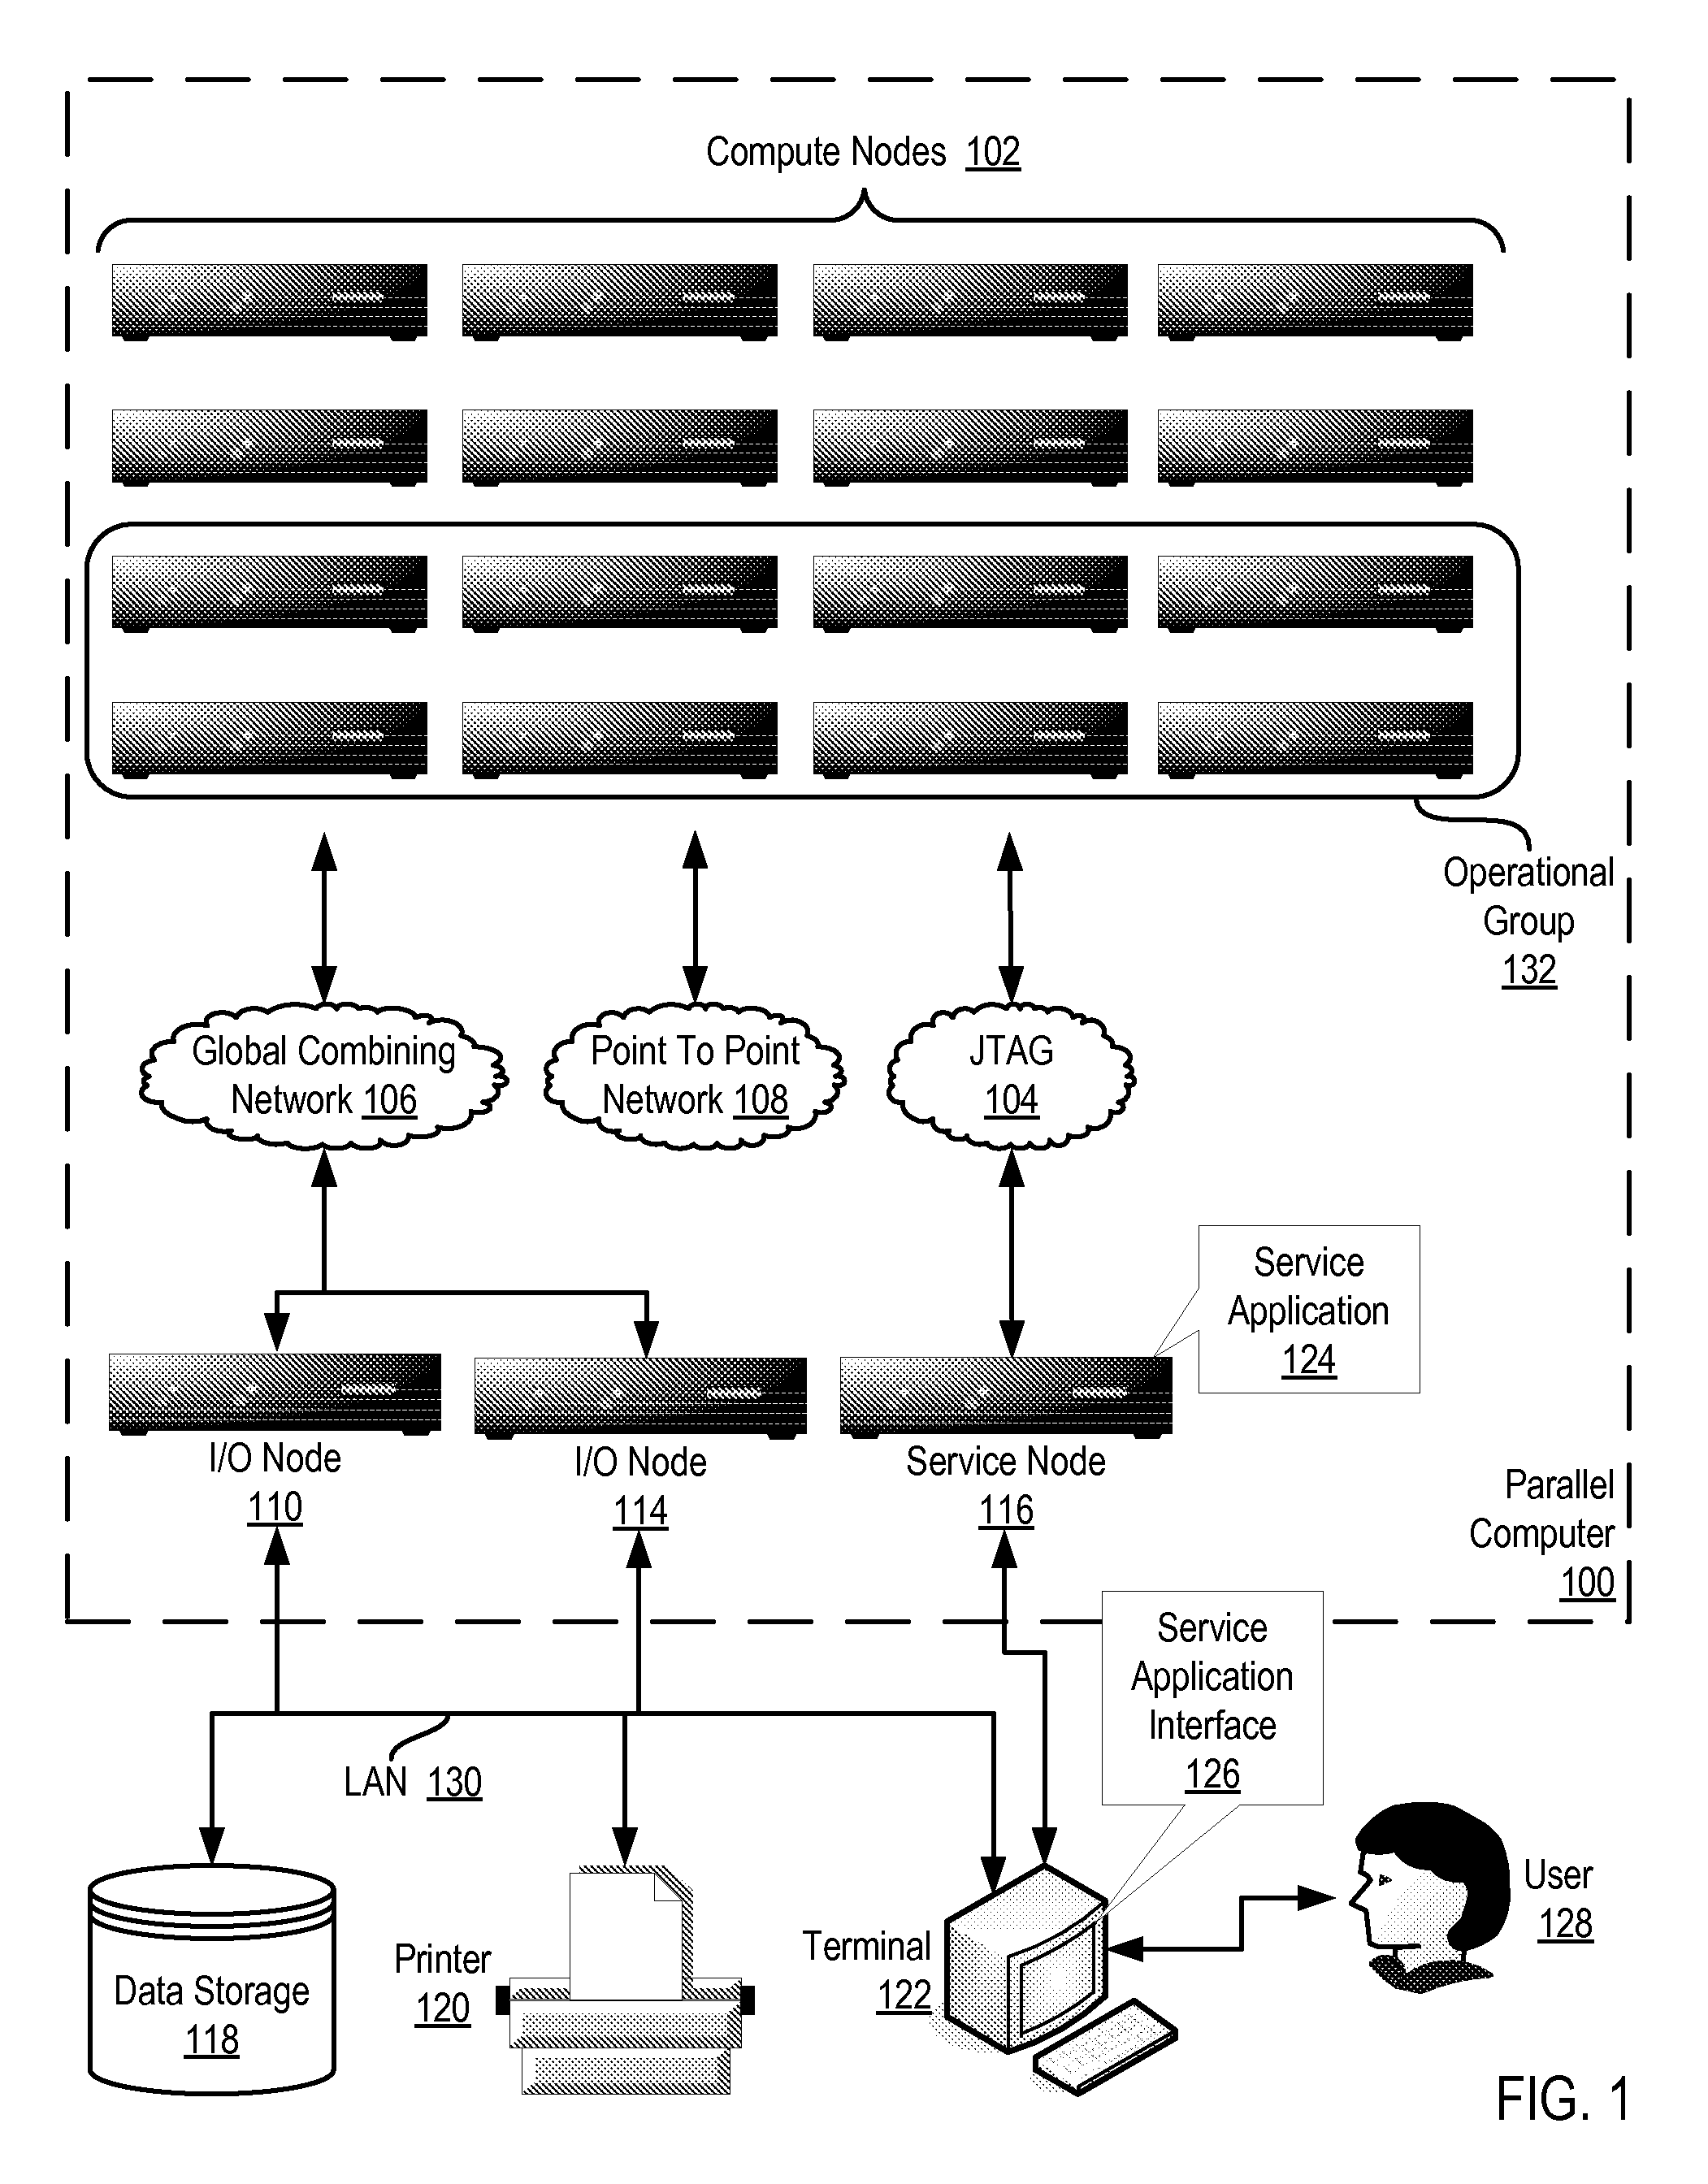 Processing data access requests among a plurality of compute nodes